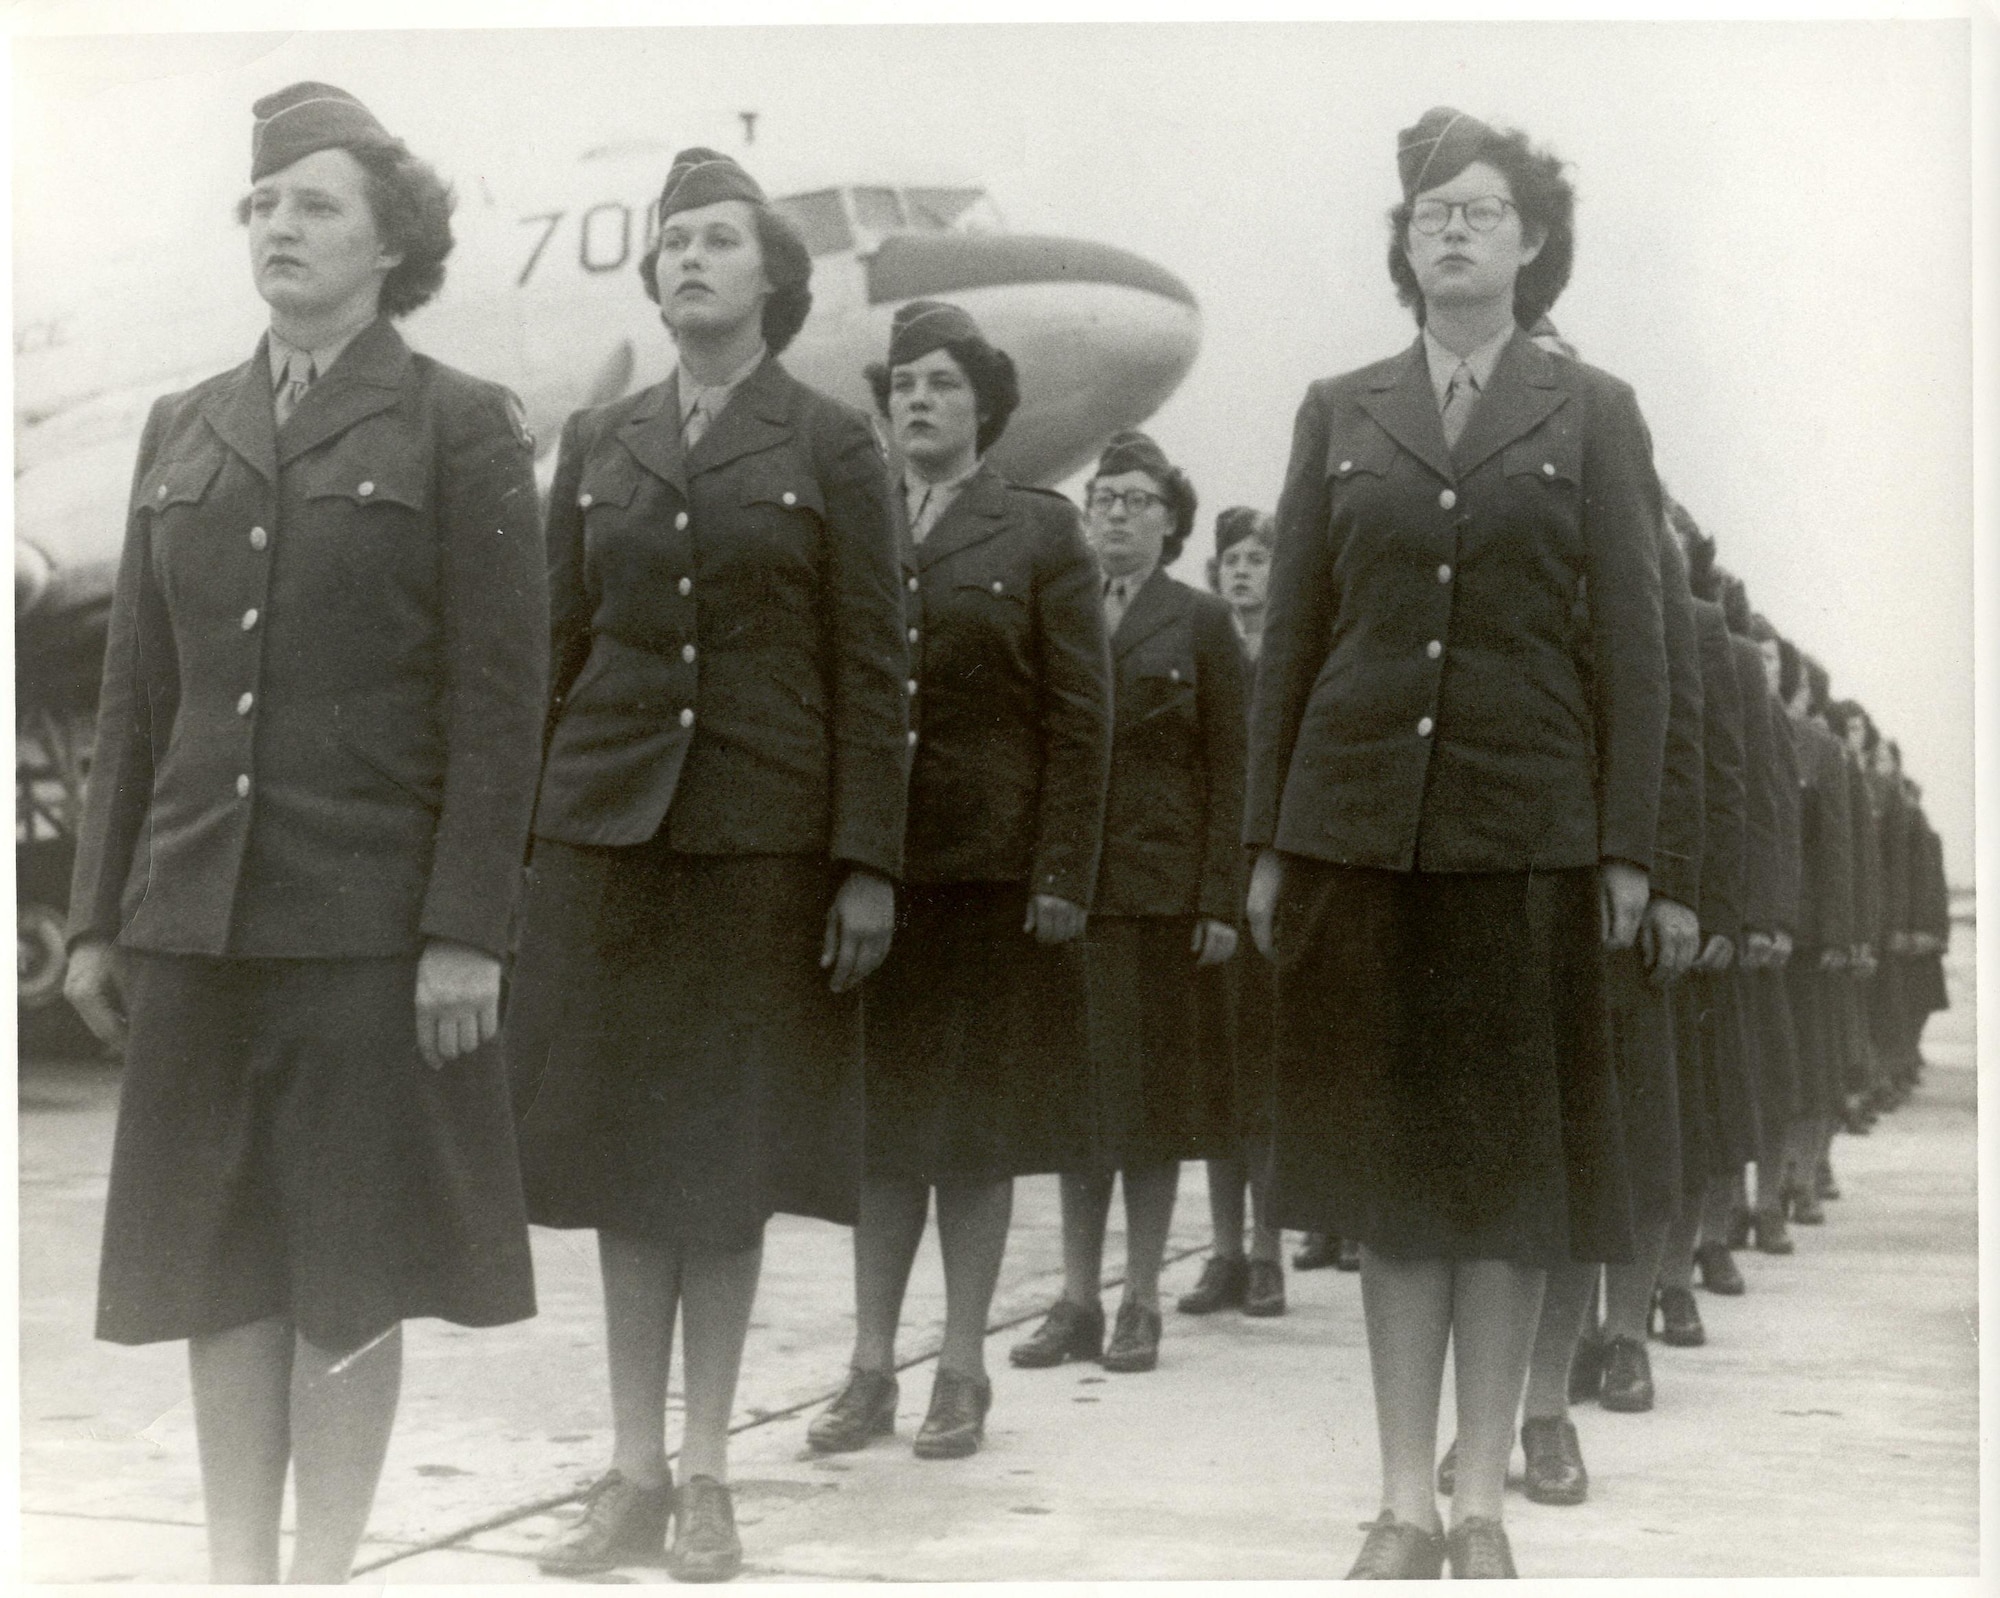 The 58th Woman’s Army Auxiliary Corps Post Headquarters Company became the first female unit stationed at Scott Field when it moved from Florida in March 1943. The 156-member unit worked in the hospital, Radio School, offices, motor pool, hangar and control tower.